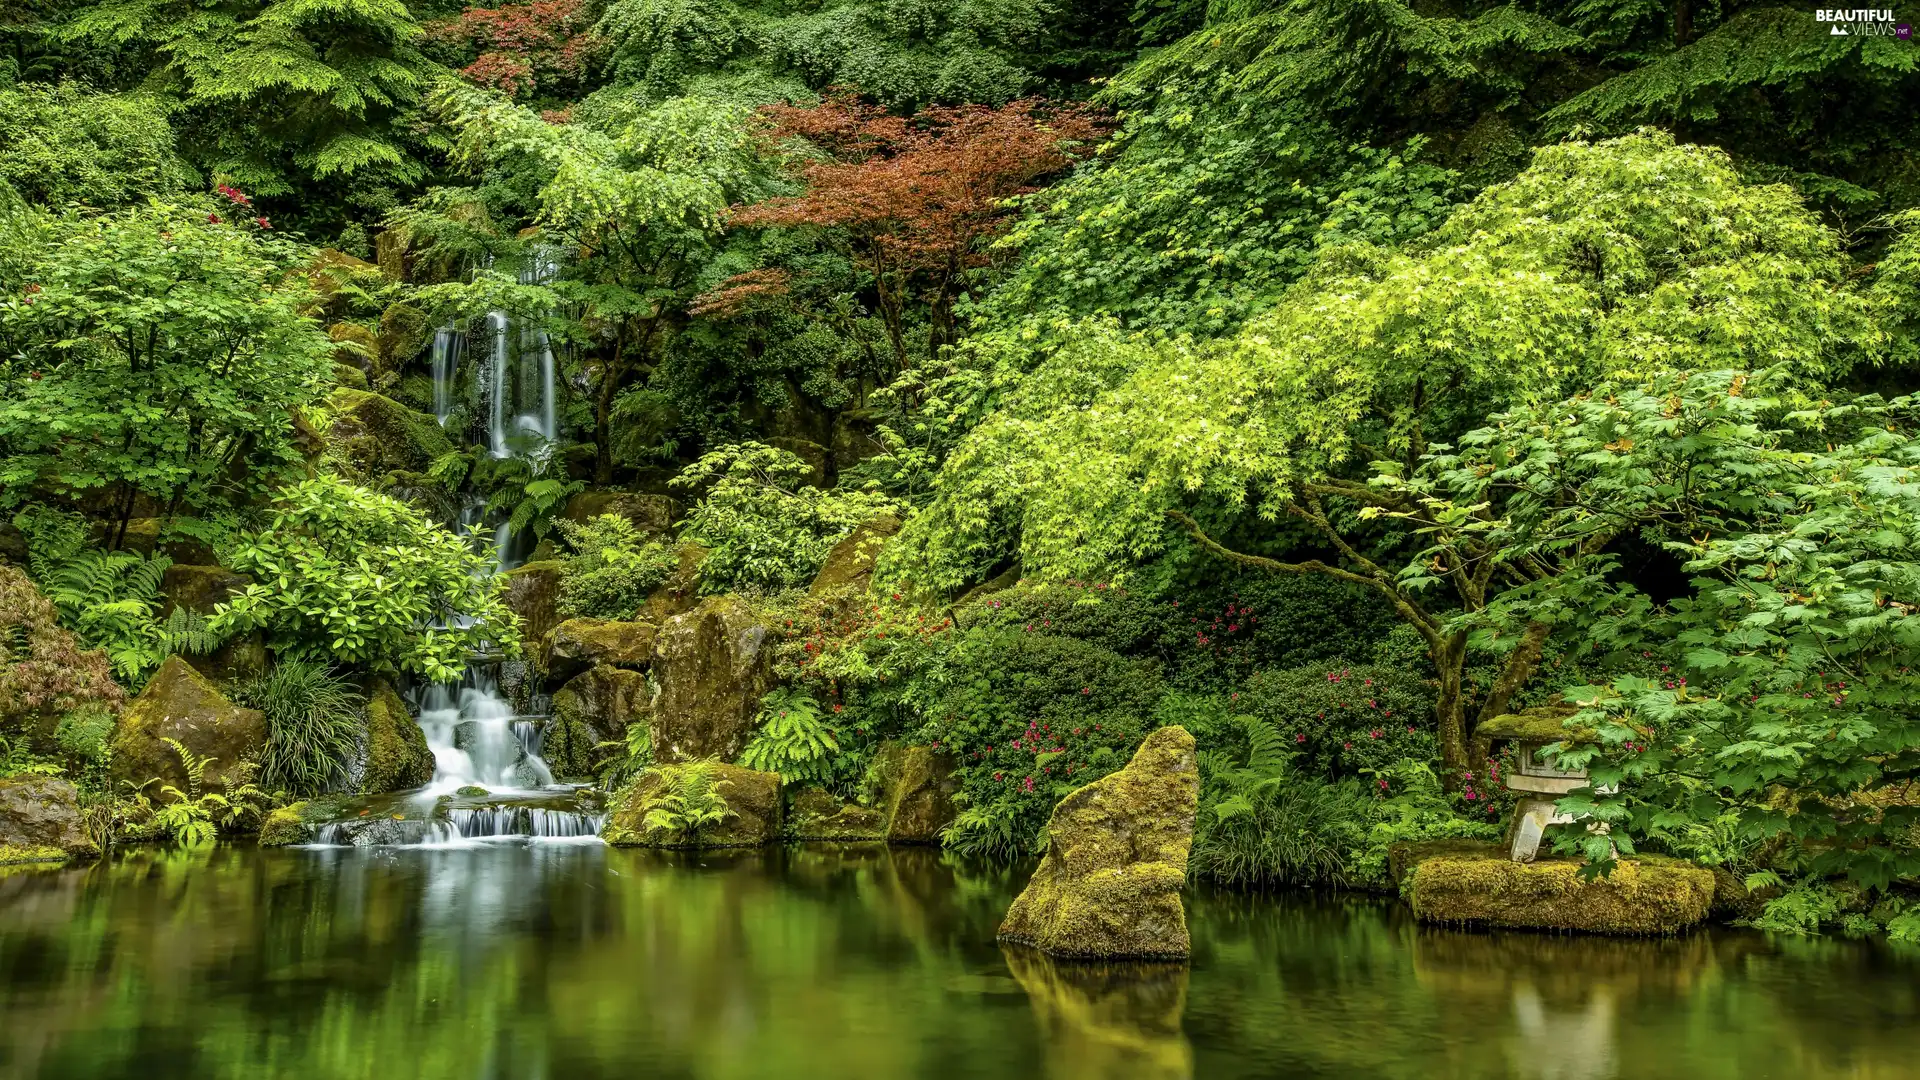 waterfall, viewes, Garden, Bush, trees, Stones, Park